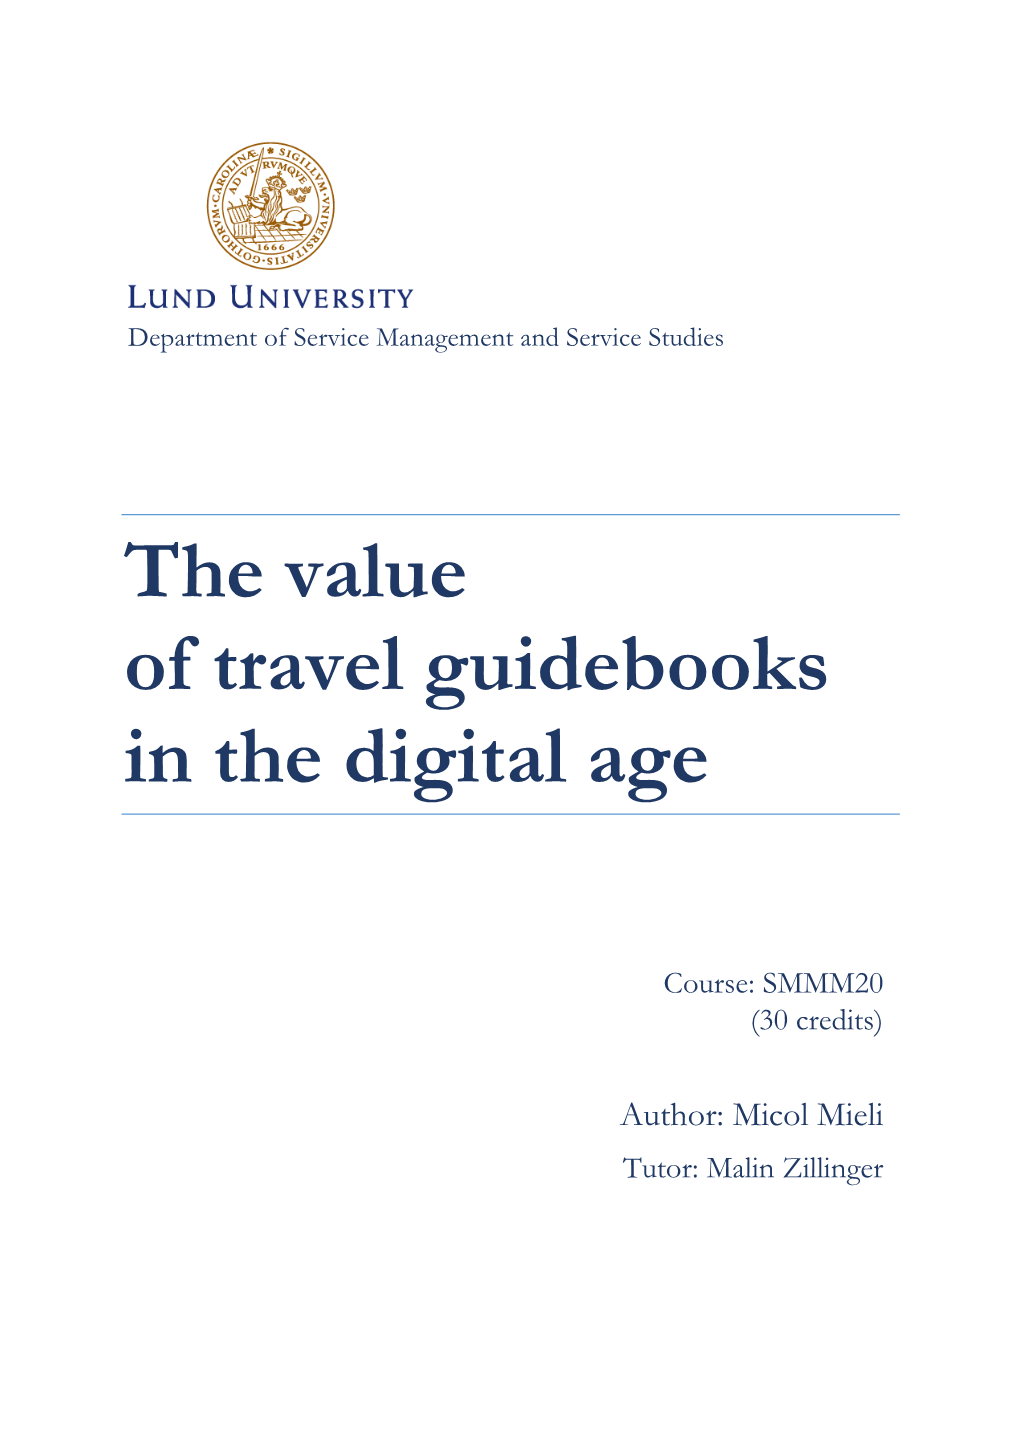 The Role and Value of Travel Guidebooks in the Digital